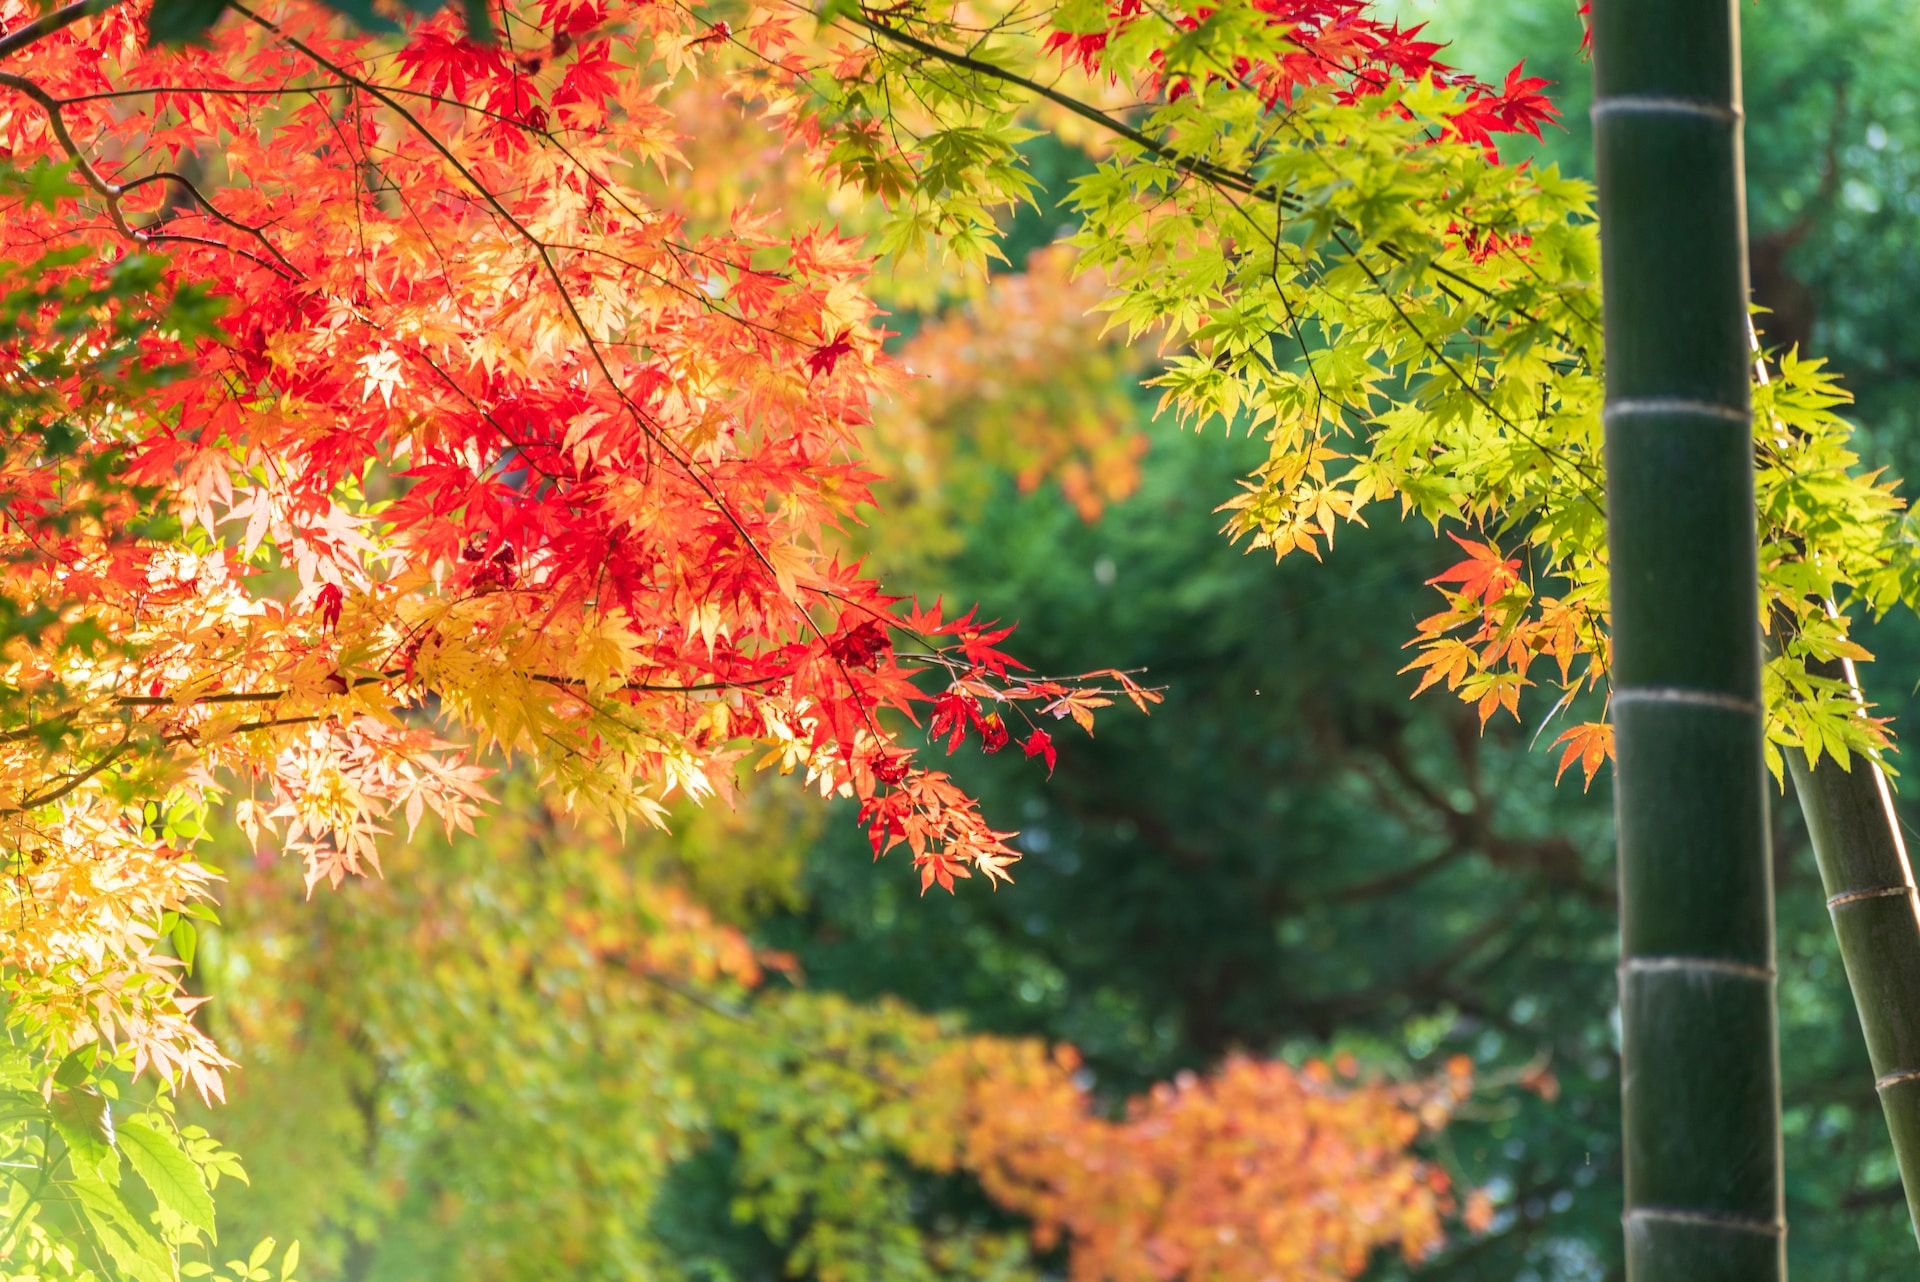 Maple trees turning red at a park in Kyoto, Japan, with a stalk of bamboo nearby